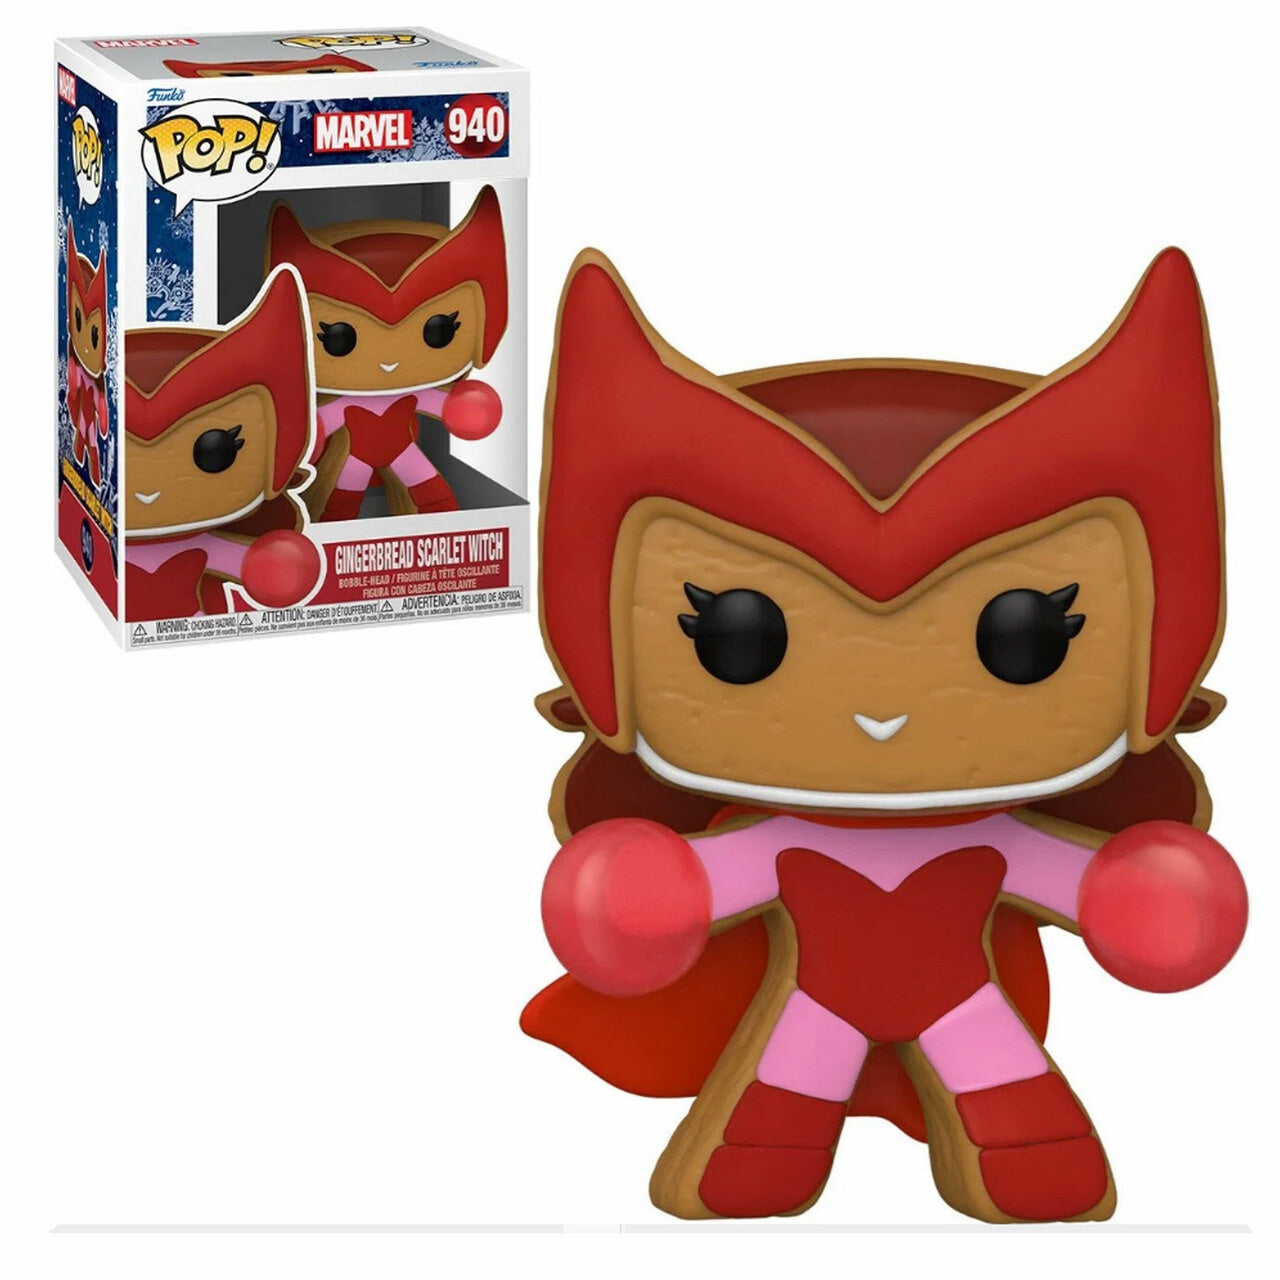 Scarlet Witch Holiday Funko Pop